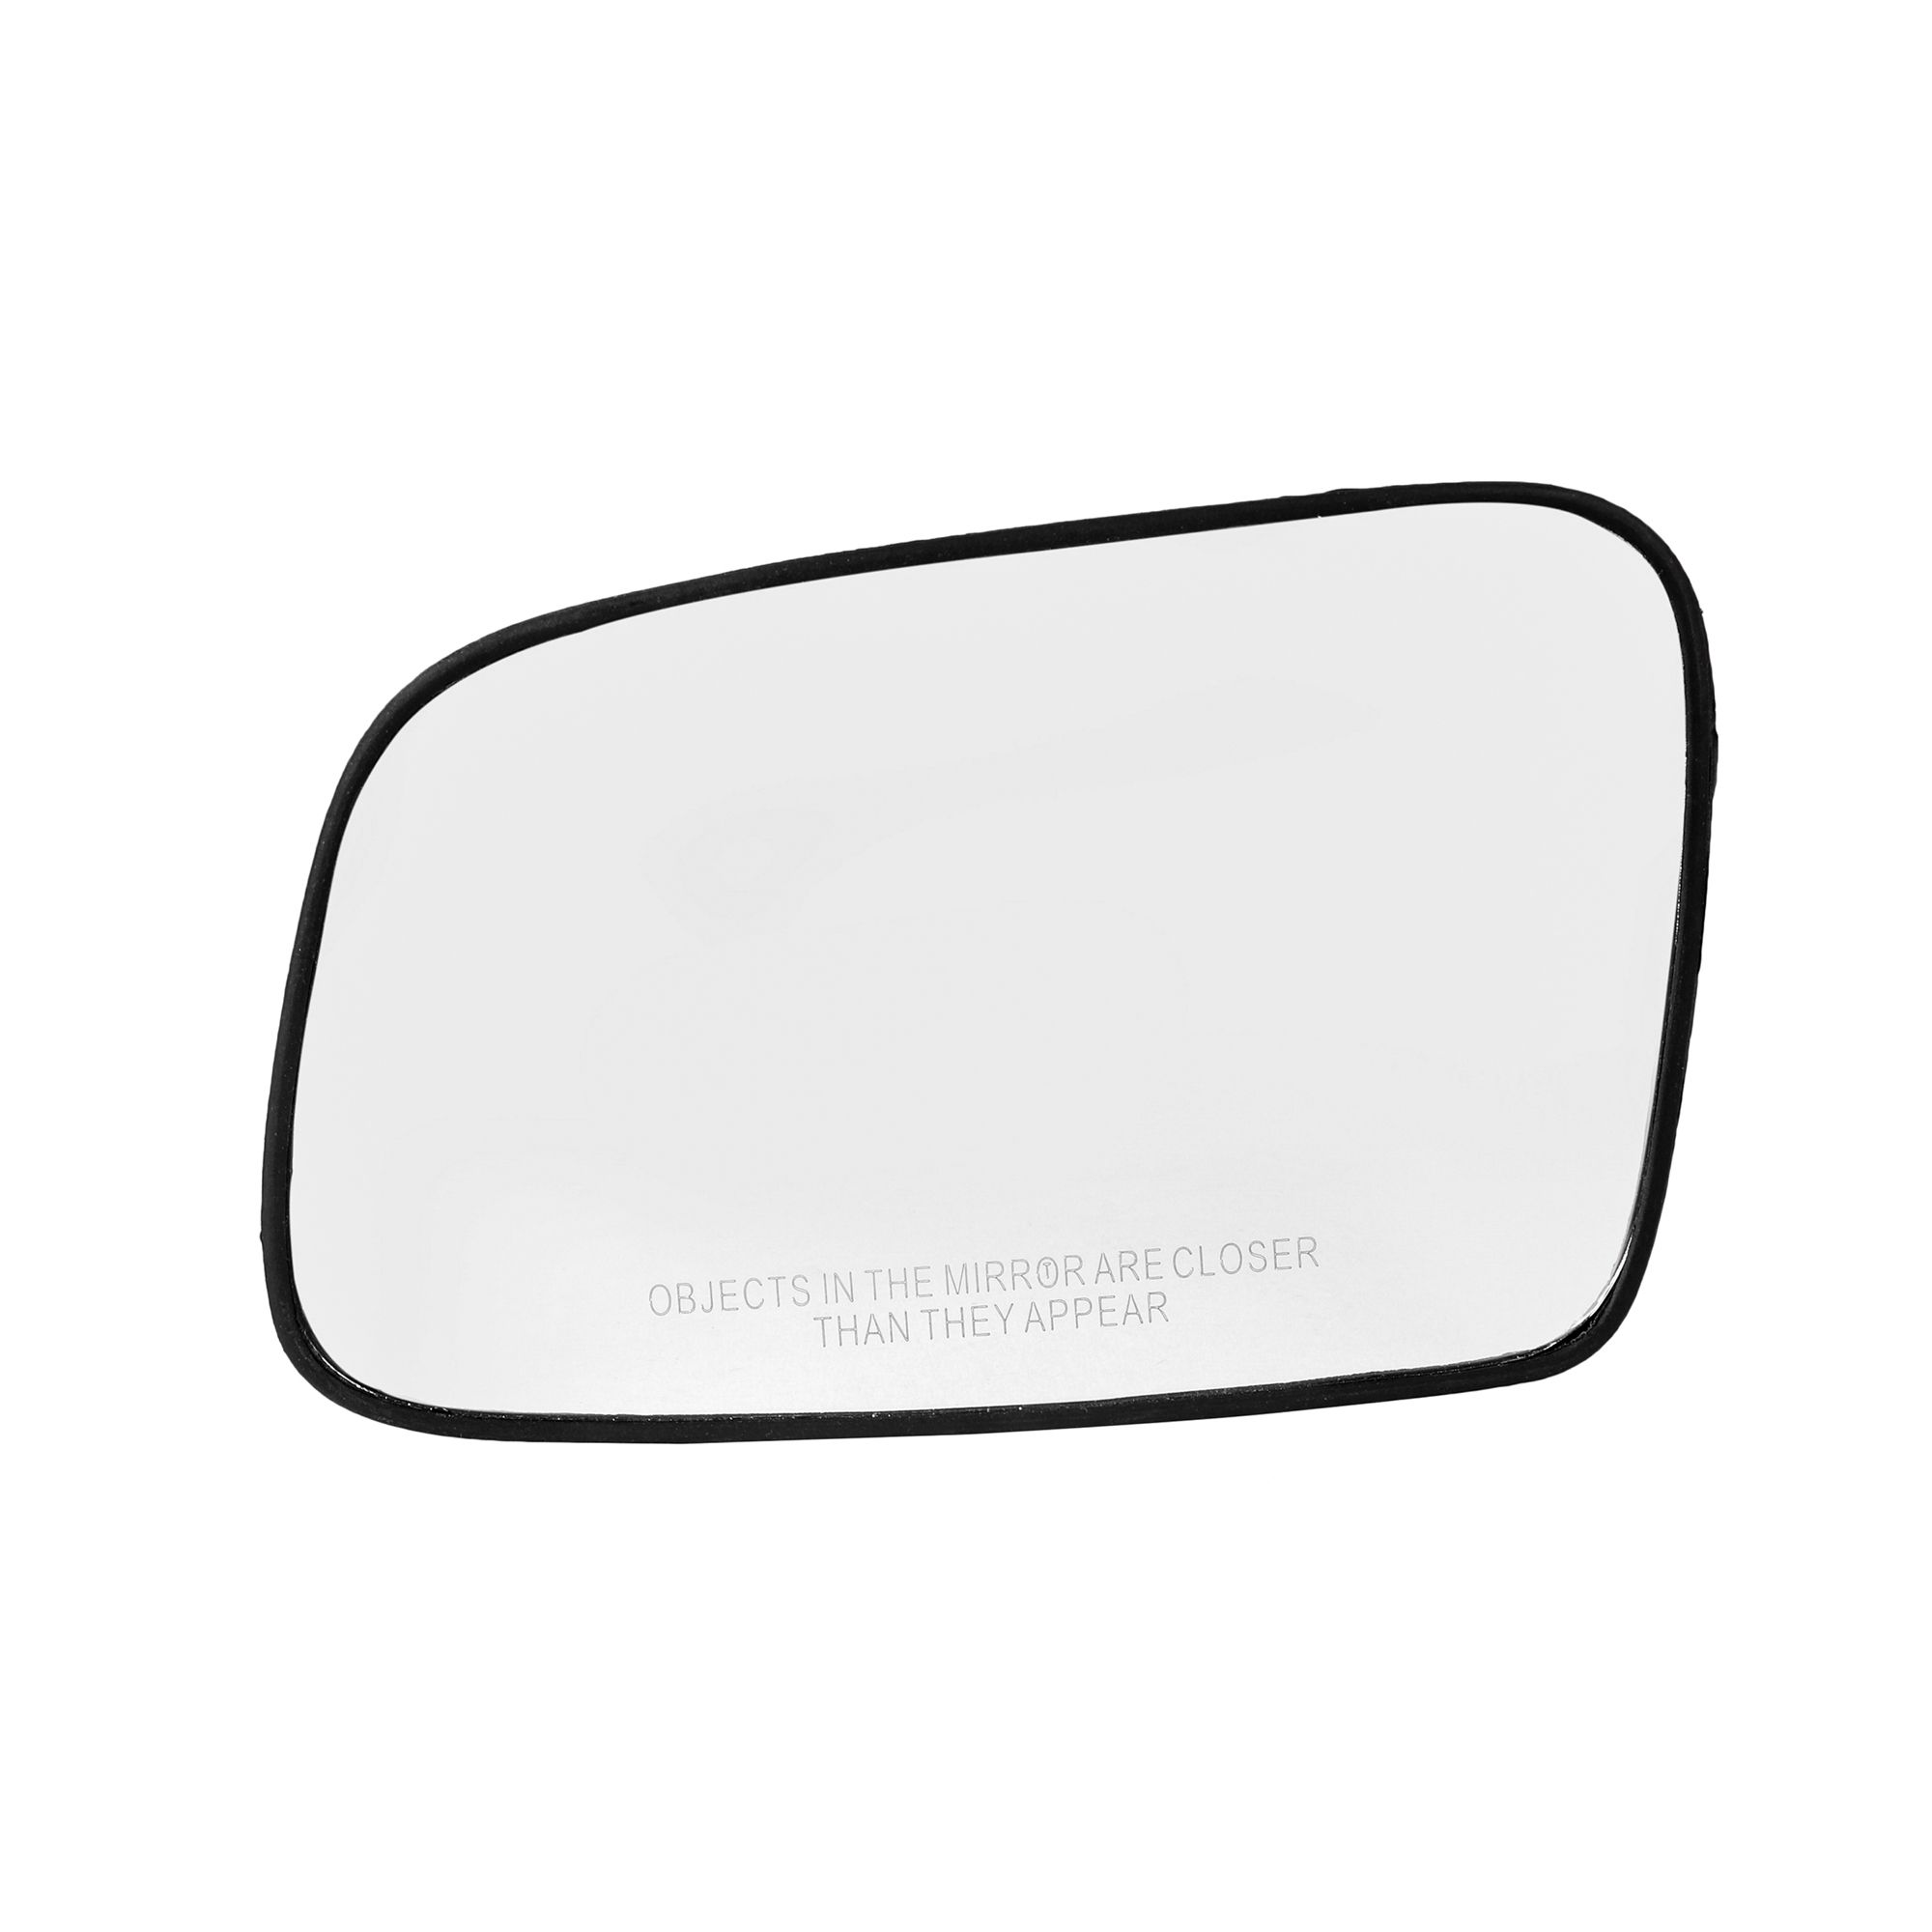 RMC Car Side Mirror Glass Plate (Sub Mirror Plate) suitable for Mahindra Xylo/Quanto/Genio (2009-2020).